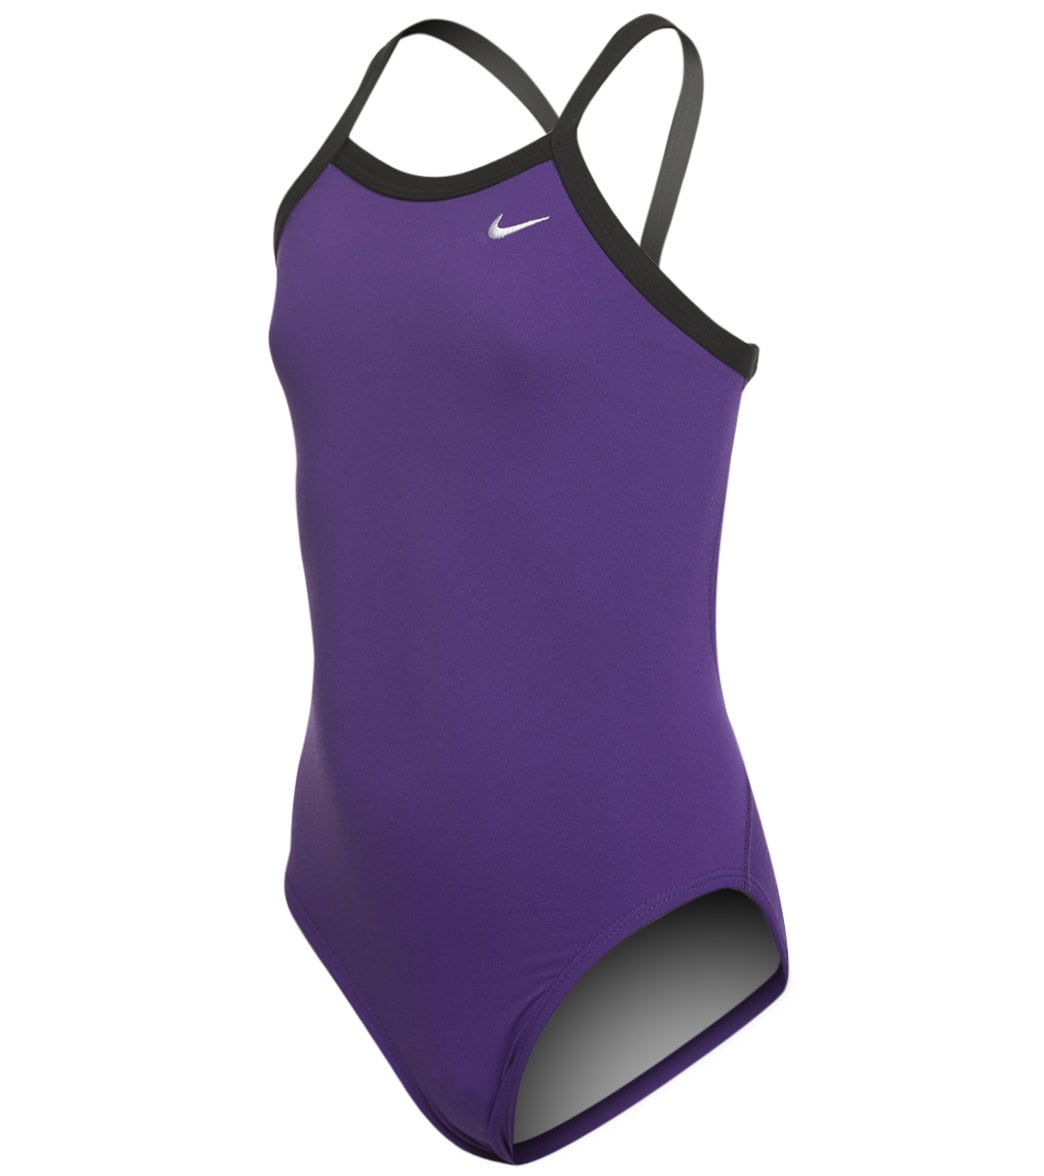 Nike Girls' Solid Poly Lingerie Tank One Piece Swimsuit - Court Purple 20 Polyester - Swimoutlet.com